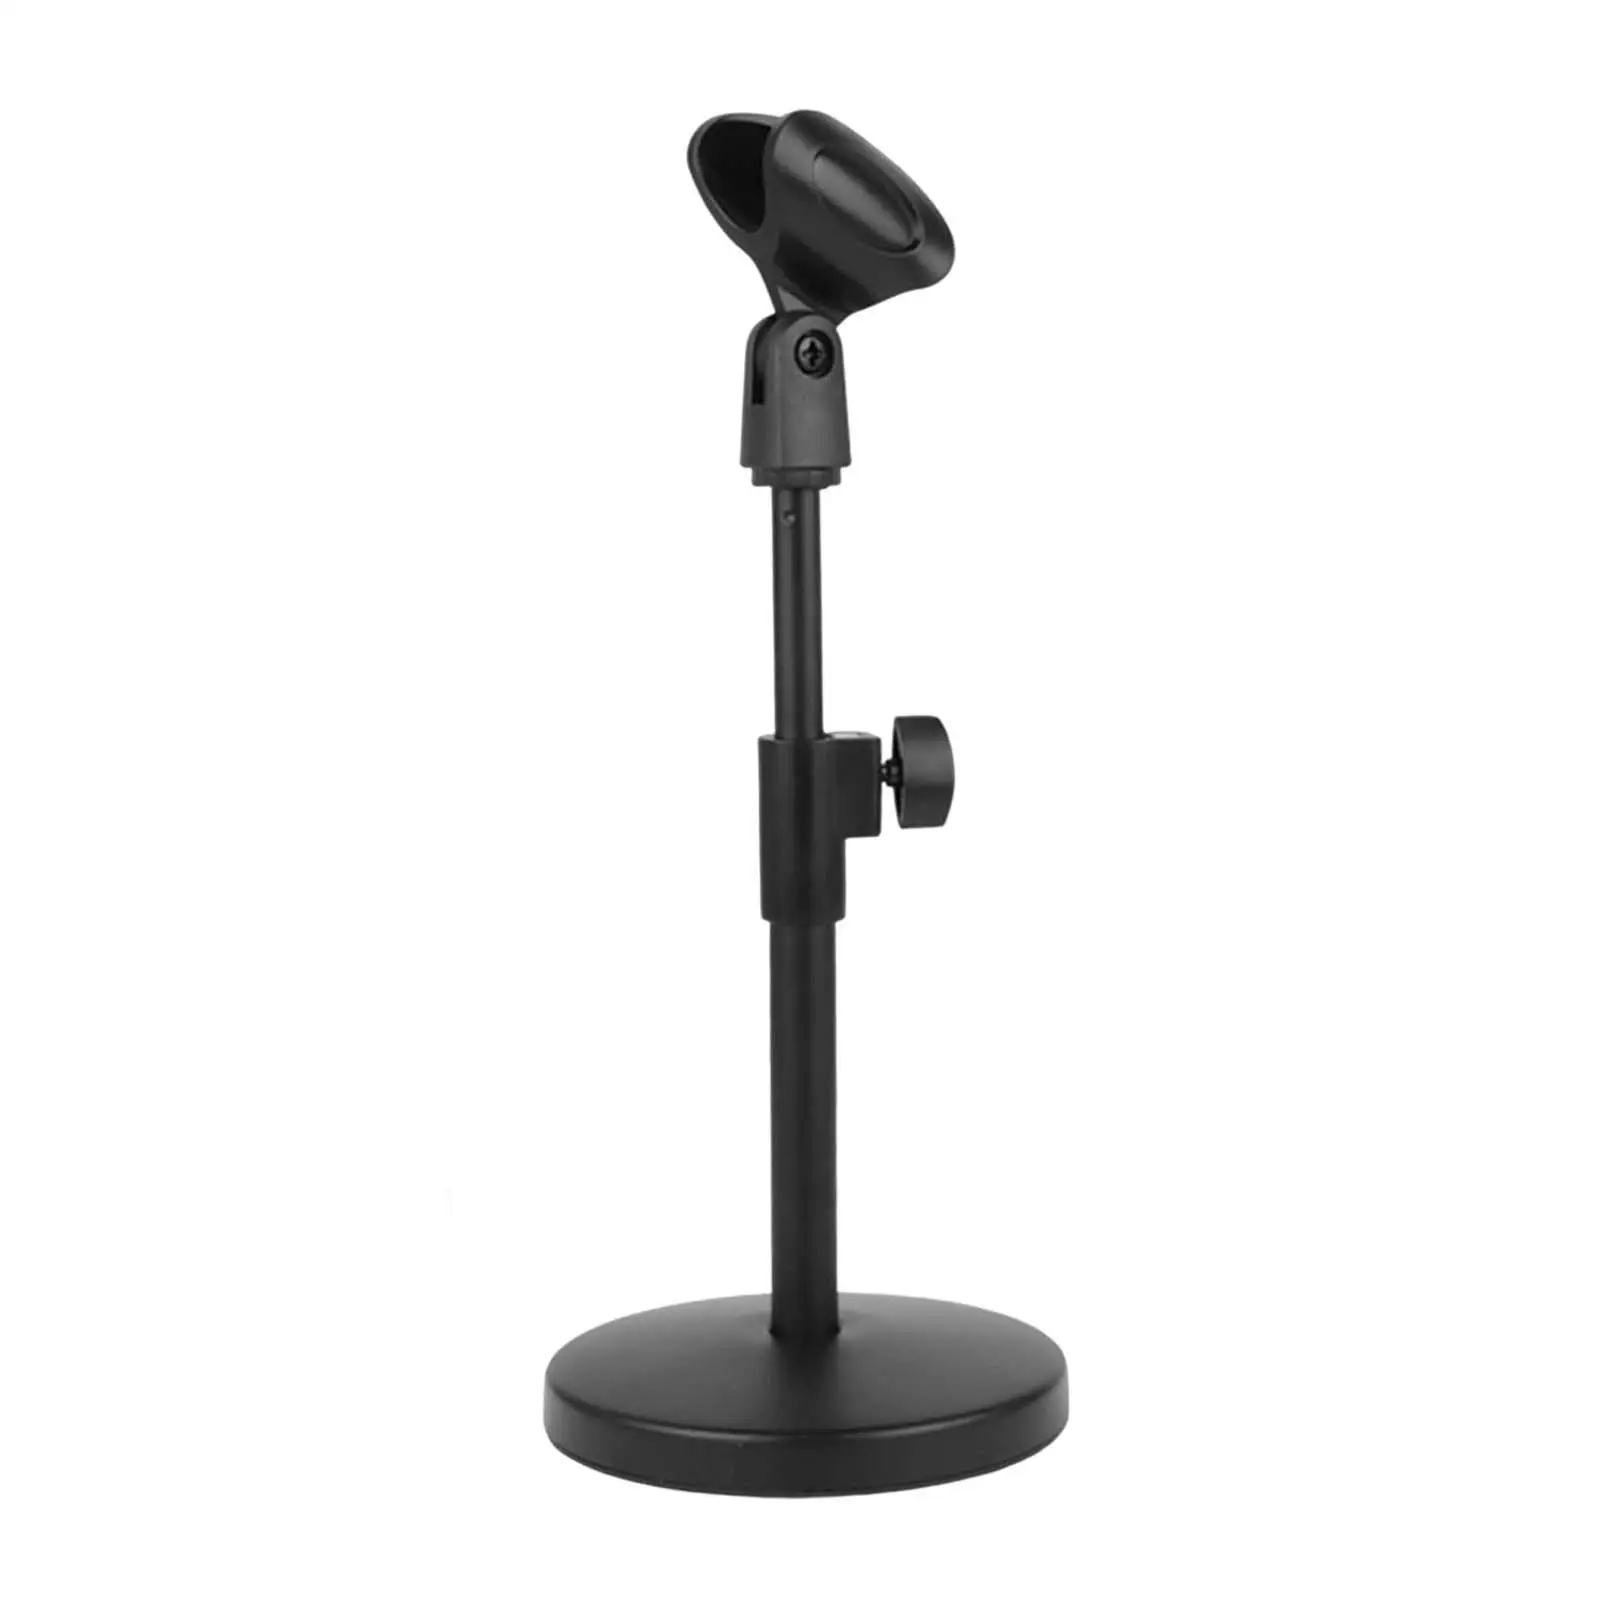 Mini Table Microphone Stand Holder Adjustable Height Multi Function Durable Practical Universal Microphone Stand for Meeting